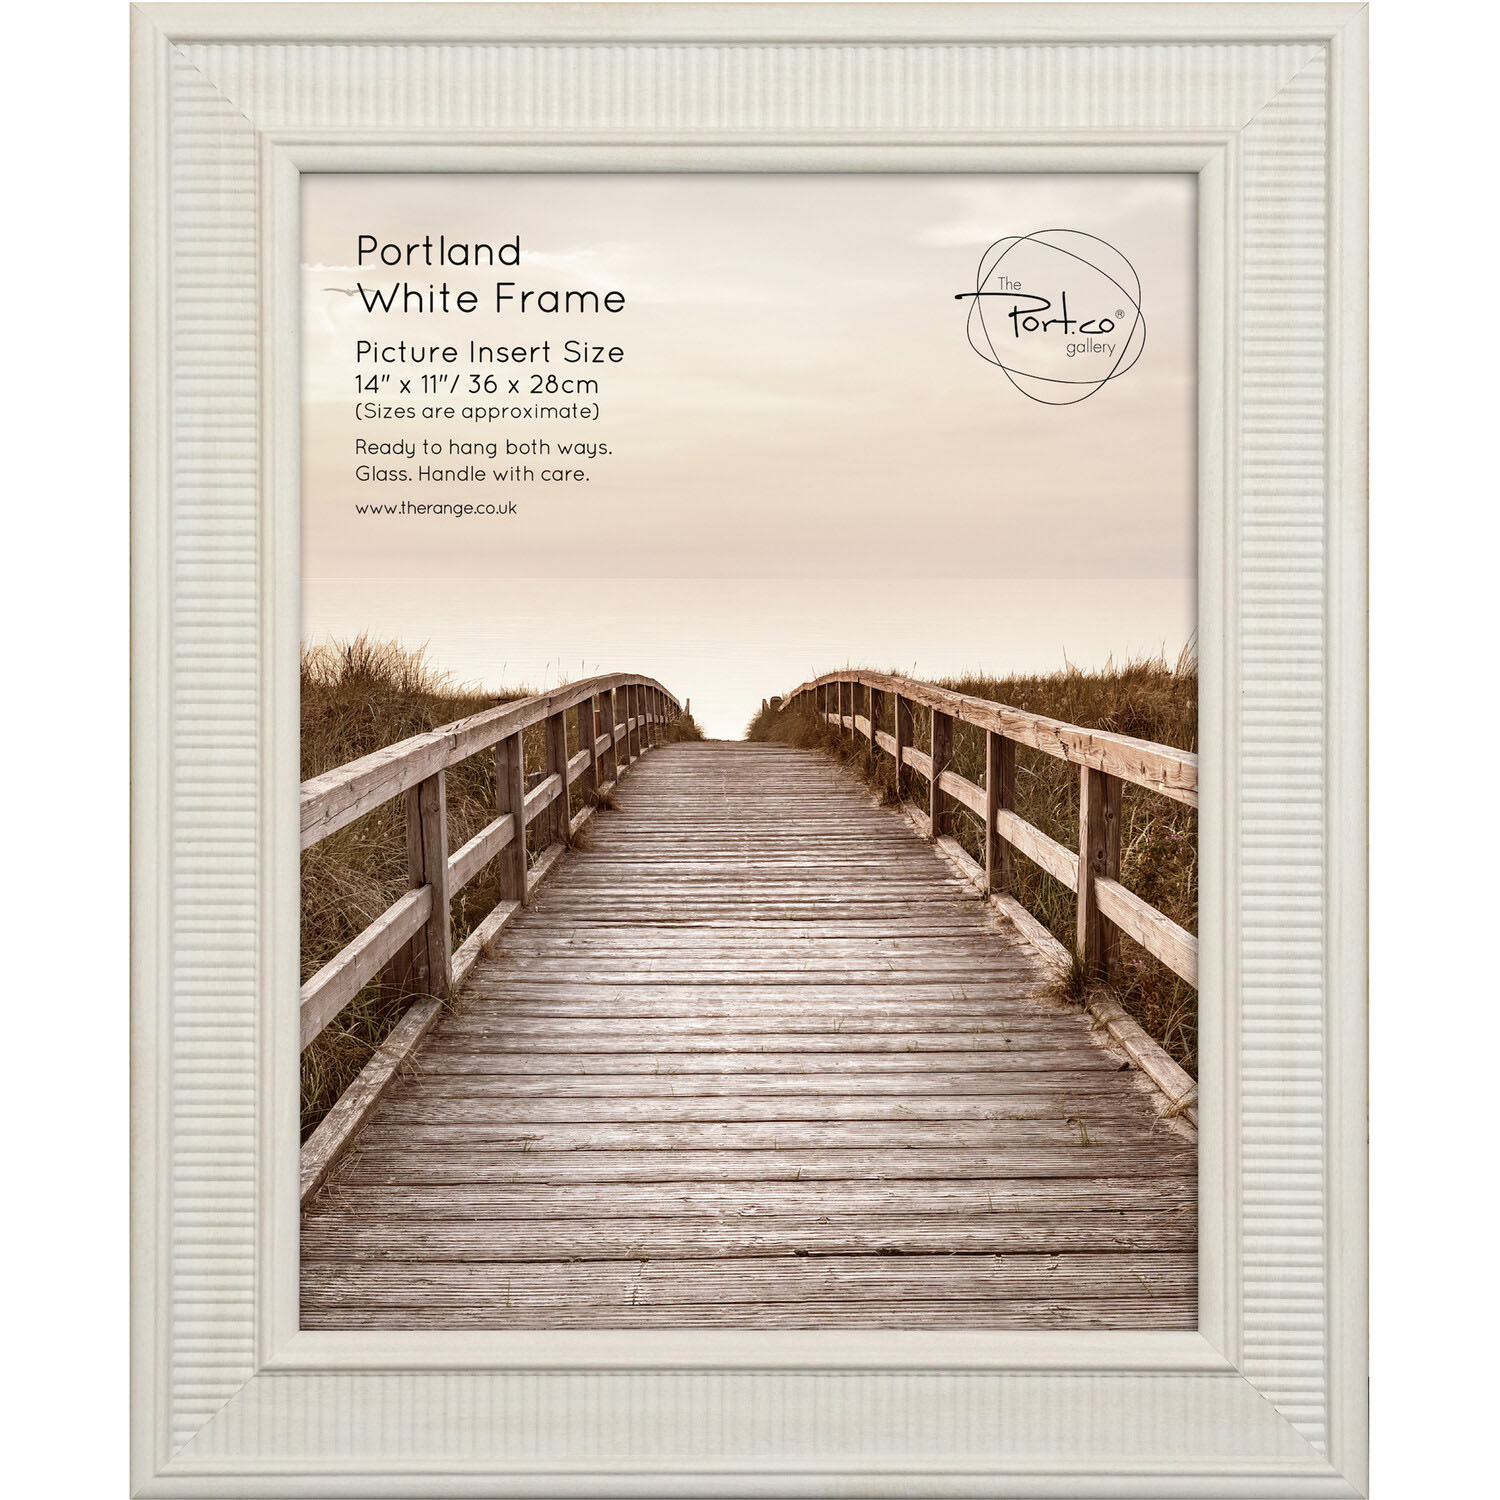 The Port. Co Gallery Portland White Photo Frame 14 x 11 inch Image 1